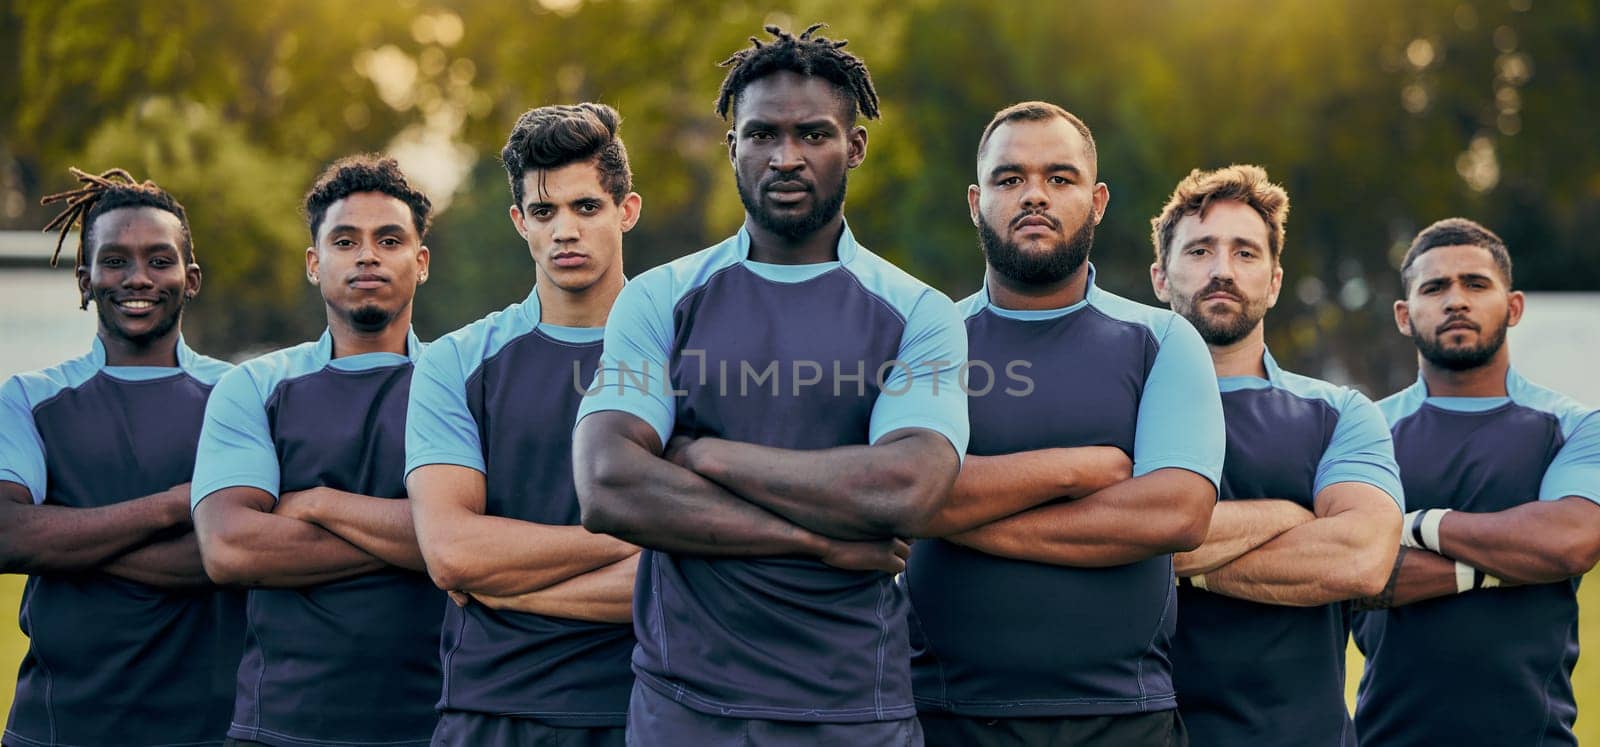 Rugby, men and portrait of team with serious expression, confidence and pride in winning game. Fitness, sports and teamwork, proud players ready for match, workout or competition on field at stadium. by YuriArcurs